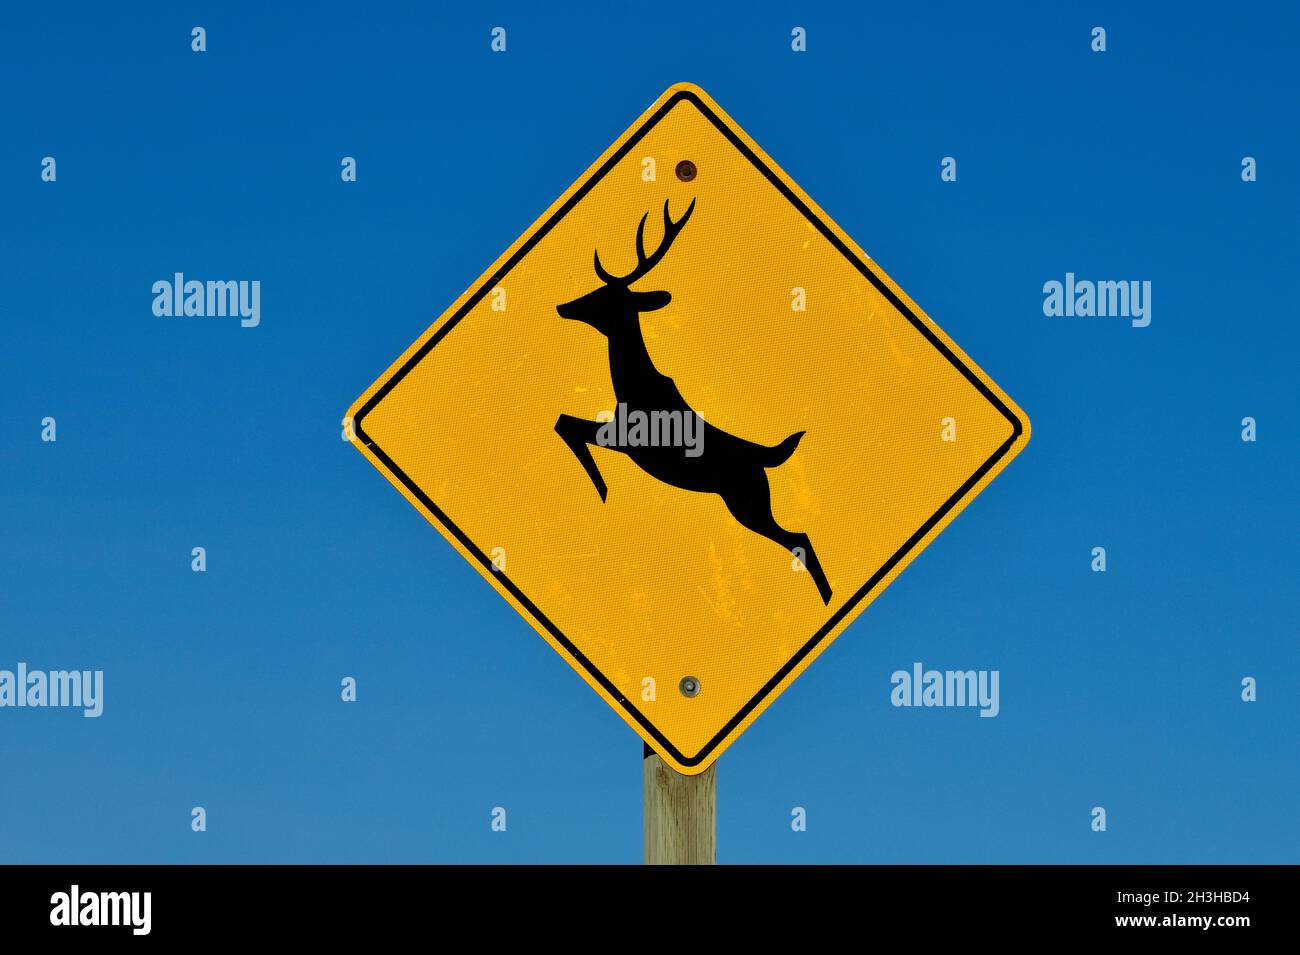 A yellow and black highway sign warning motorist that there may be wildlife crossing the road. Stock Photo